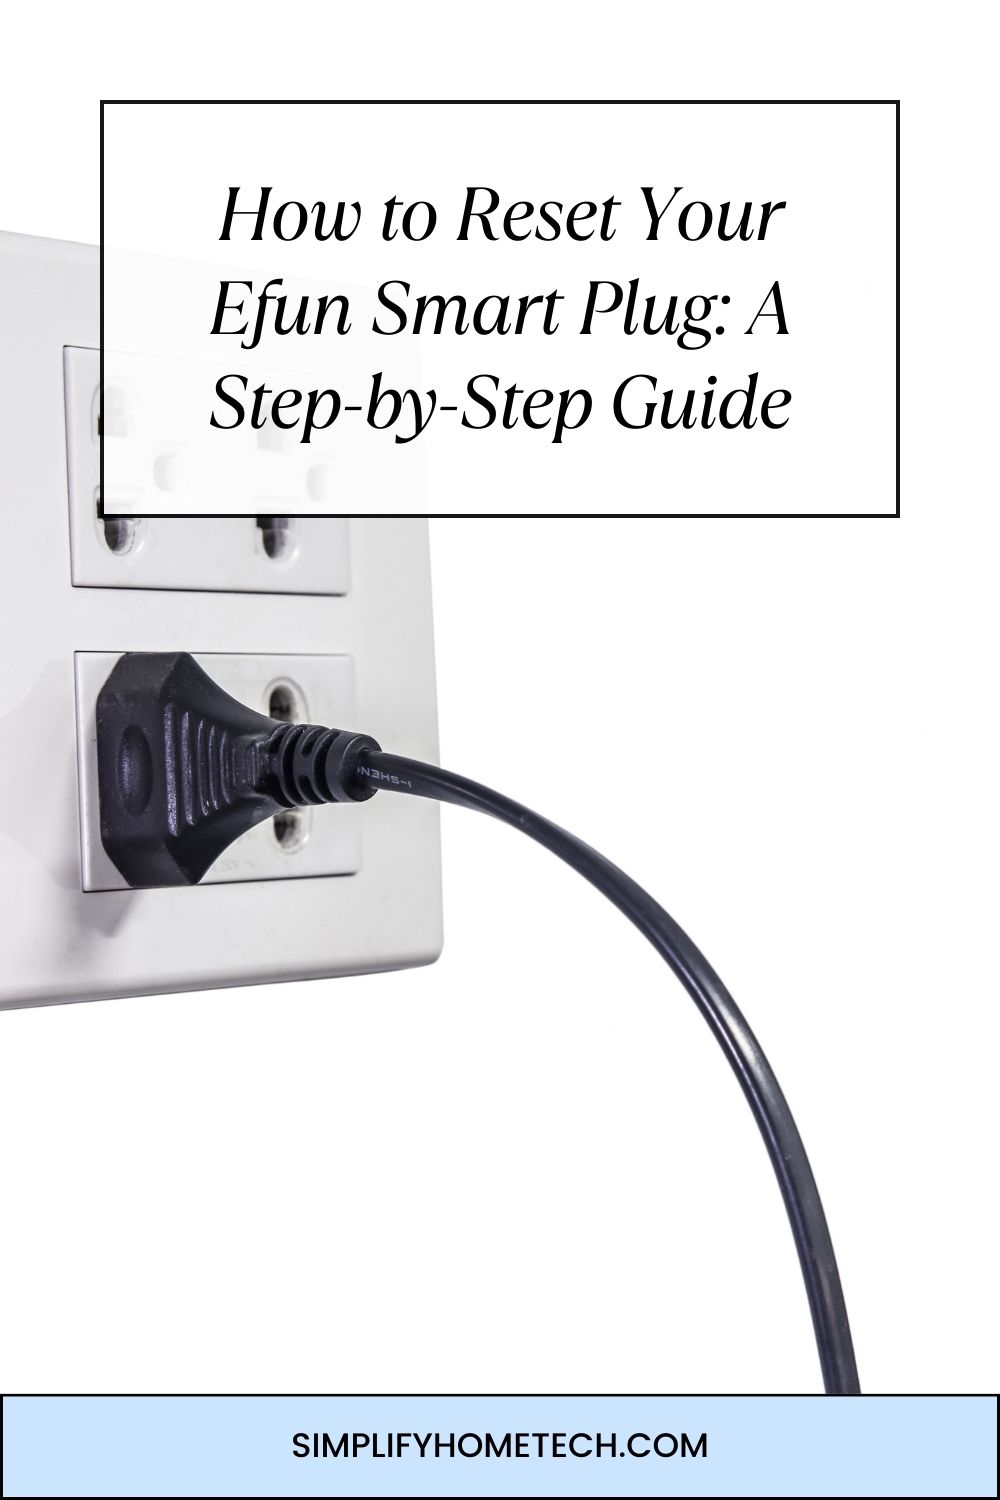 How to Reset Your Efun Smart Plug: A Step-by-Step Guide